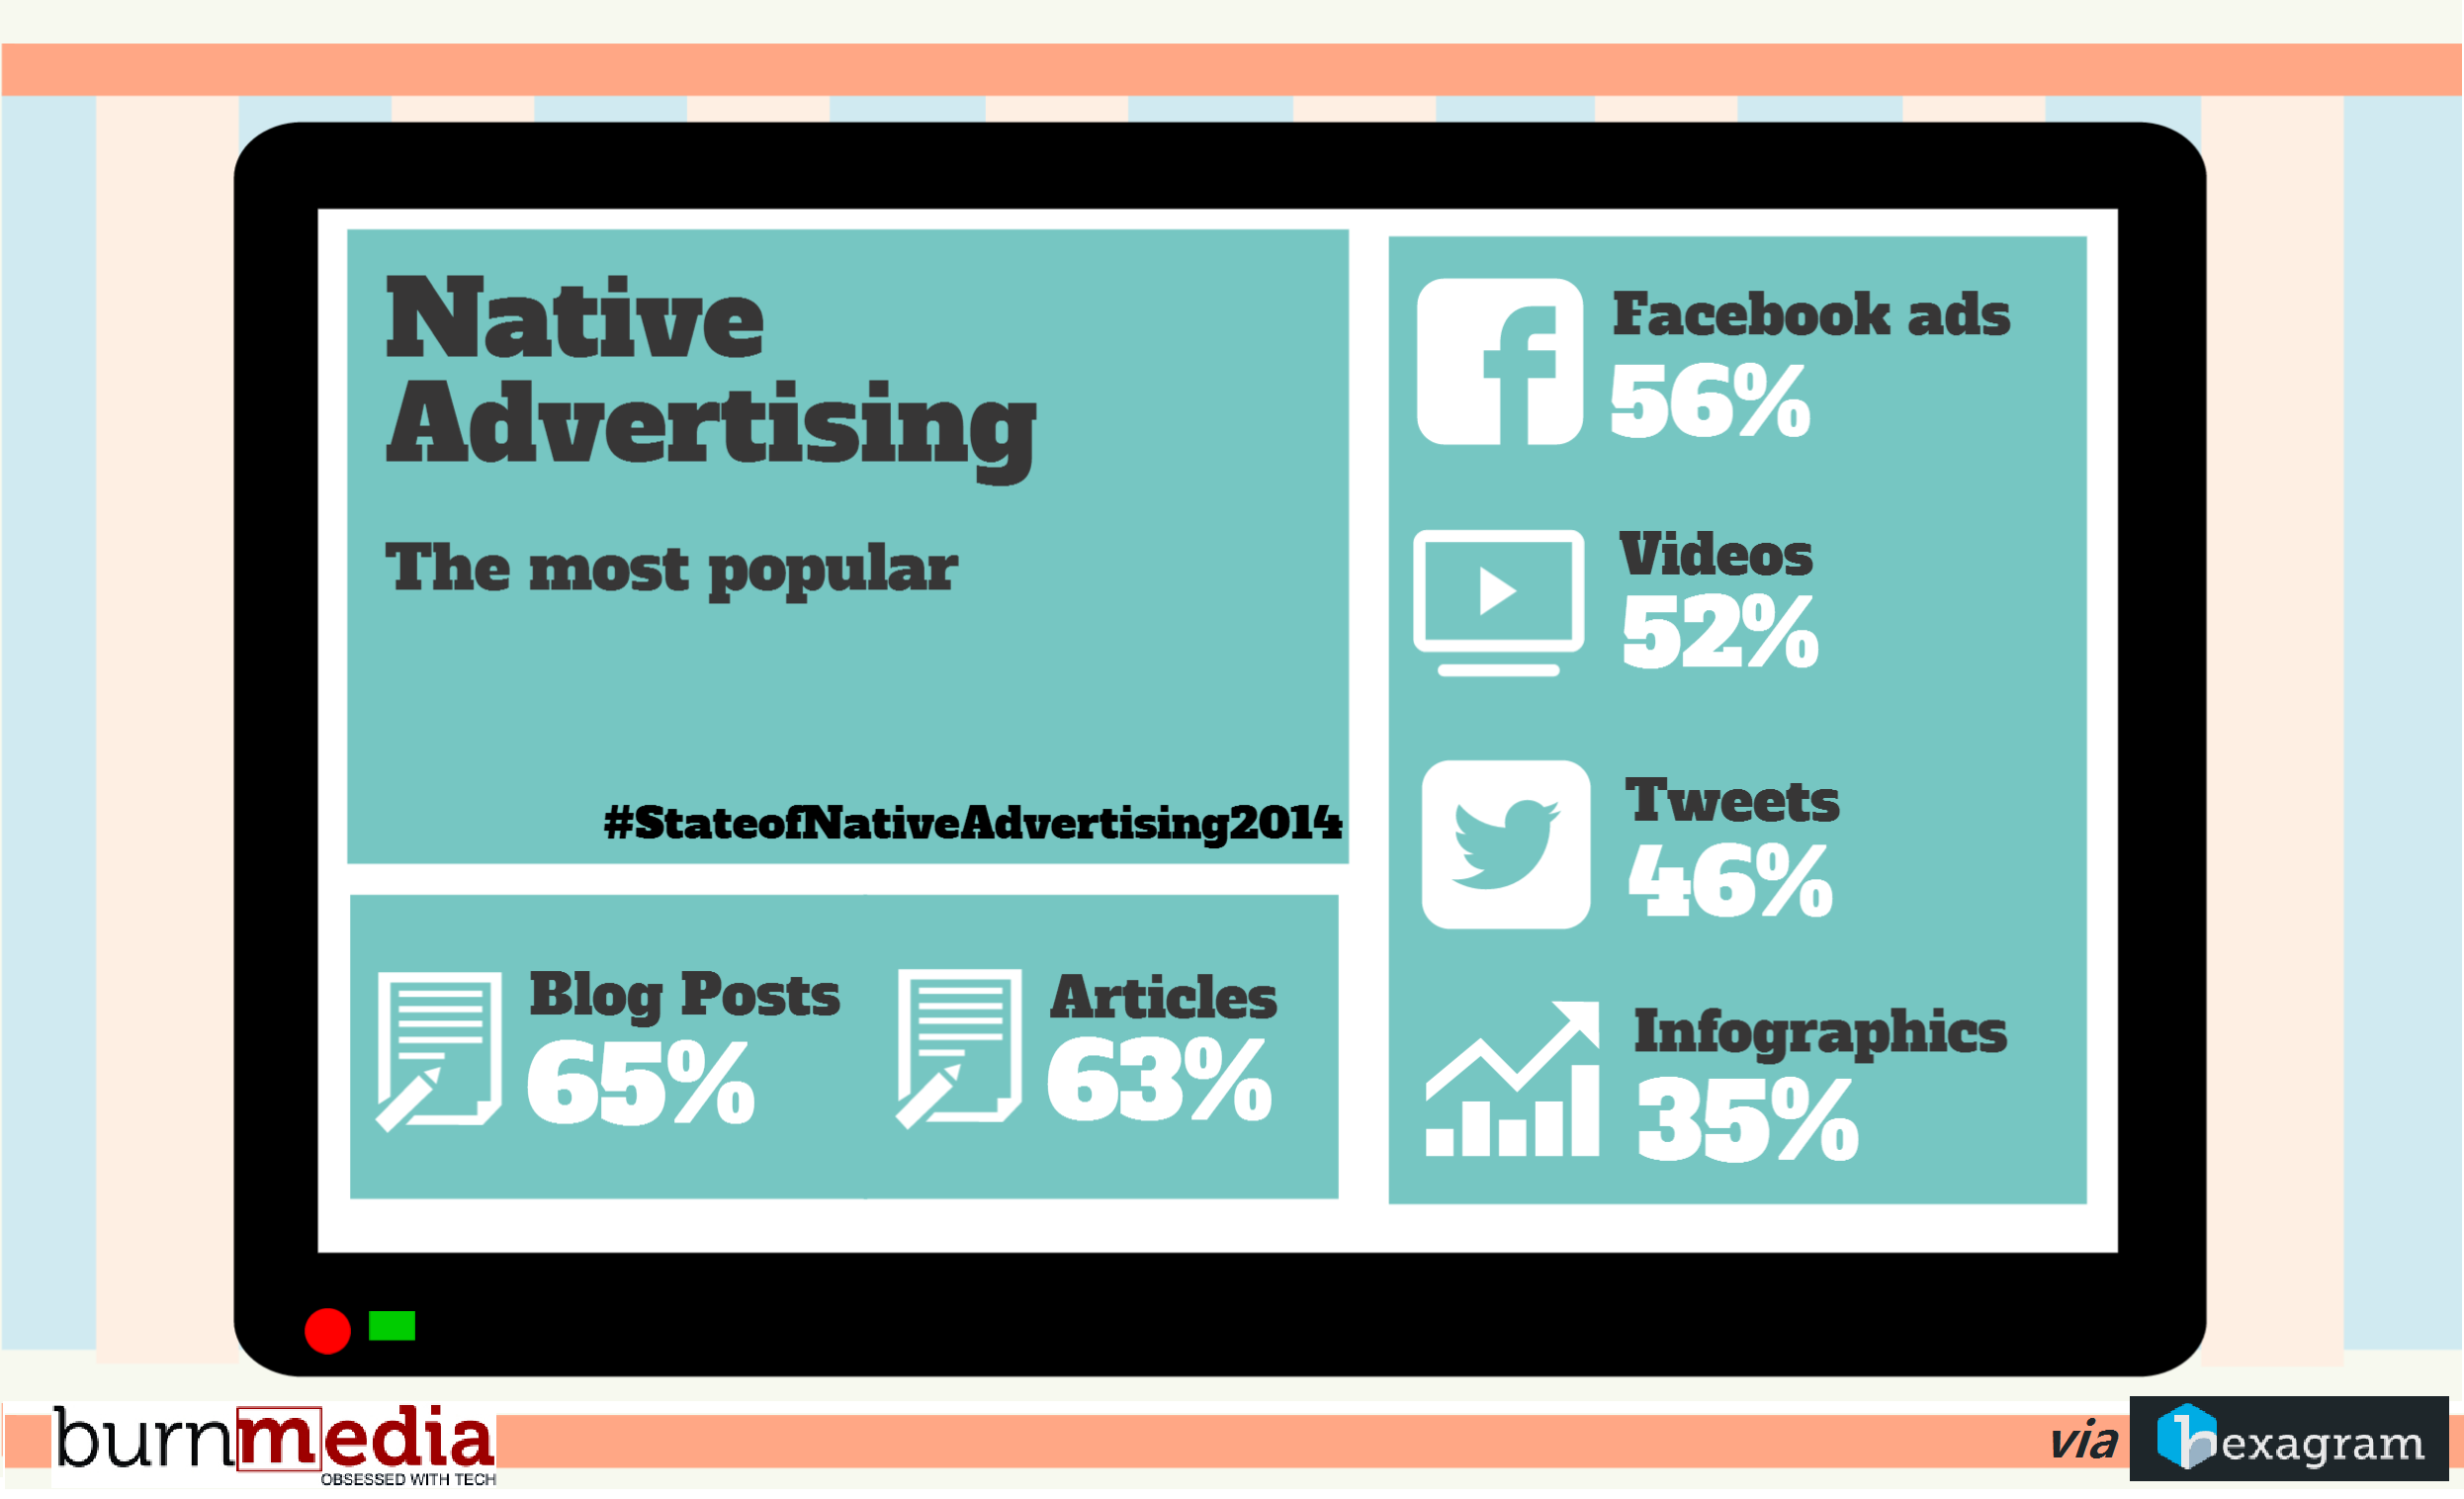 77% Of Ad Agencies Are Now Able To Explain Native Advertising To Their Clients